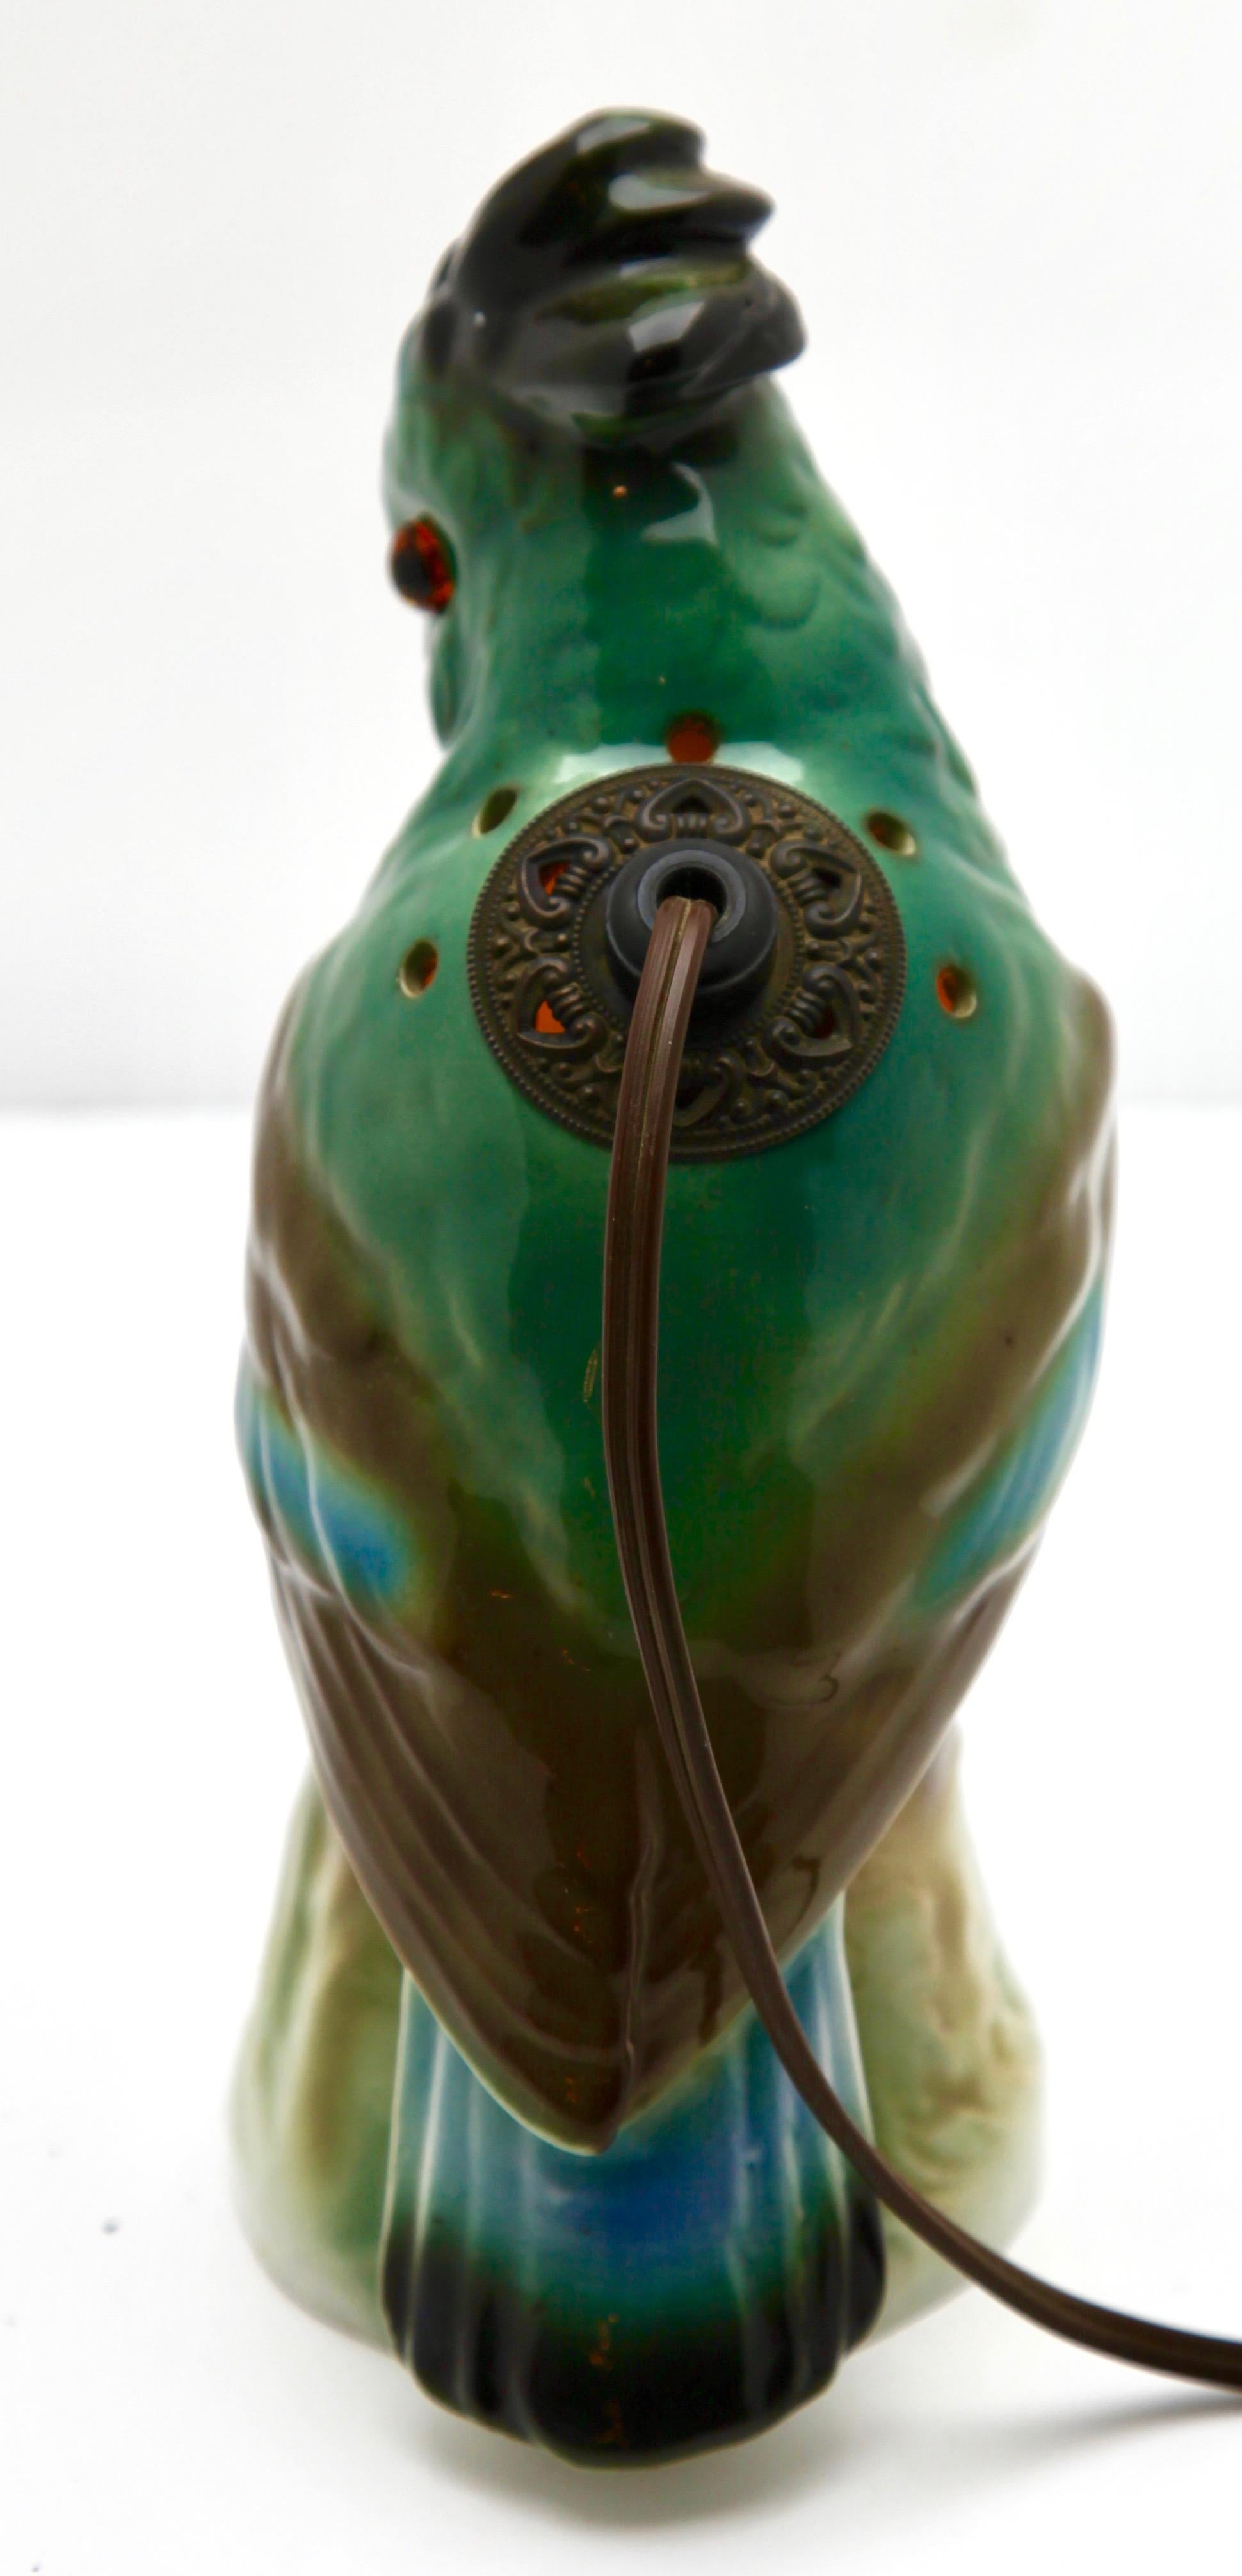 Mid-Century Modern Porcelain Parrot Figurine, Perfume or Bedside Lamp, 'Germany, 1930s'